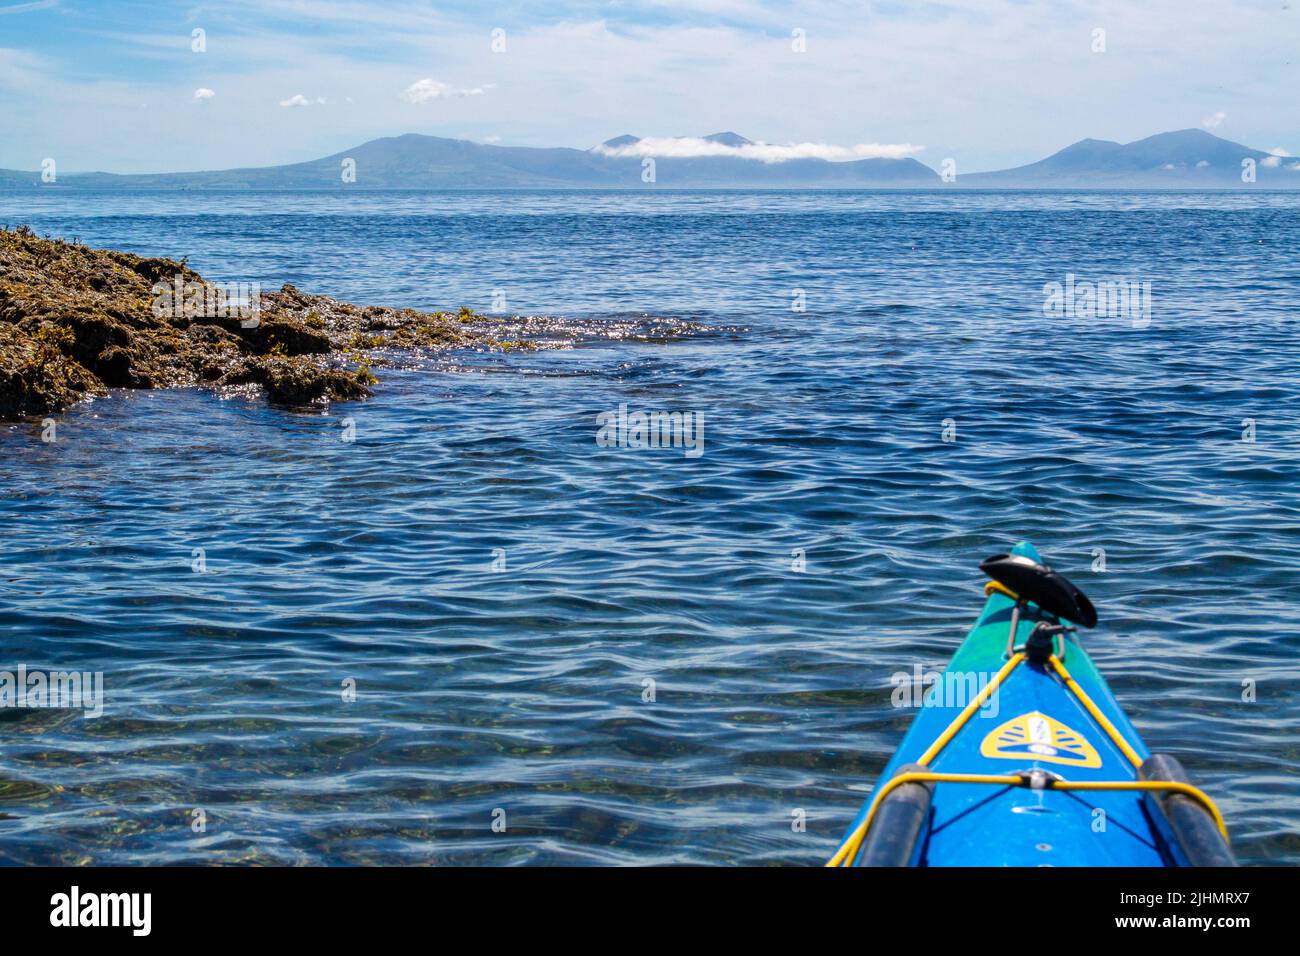 Sea kayaking / canoeing on the coast of Anglesey, North Wales, UK Stock Photo